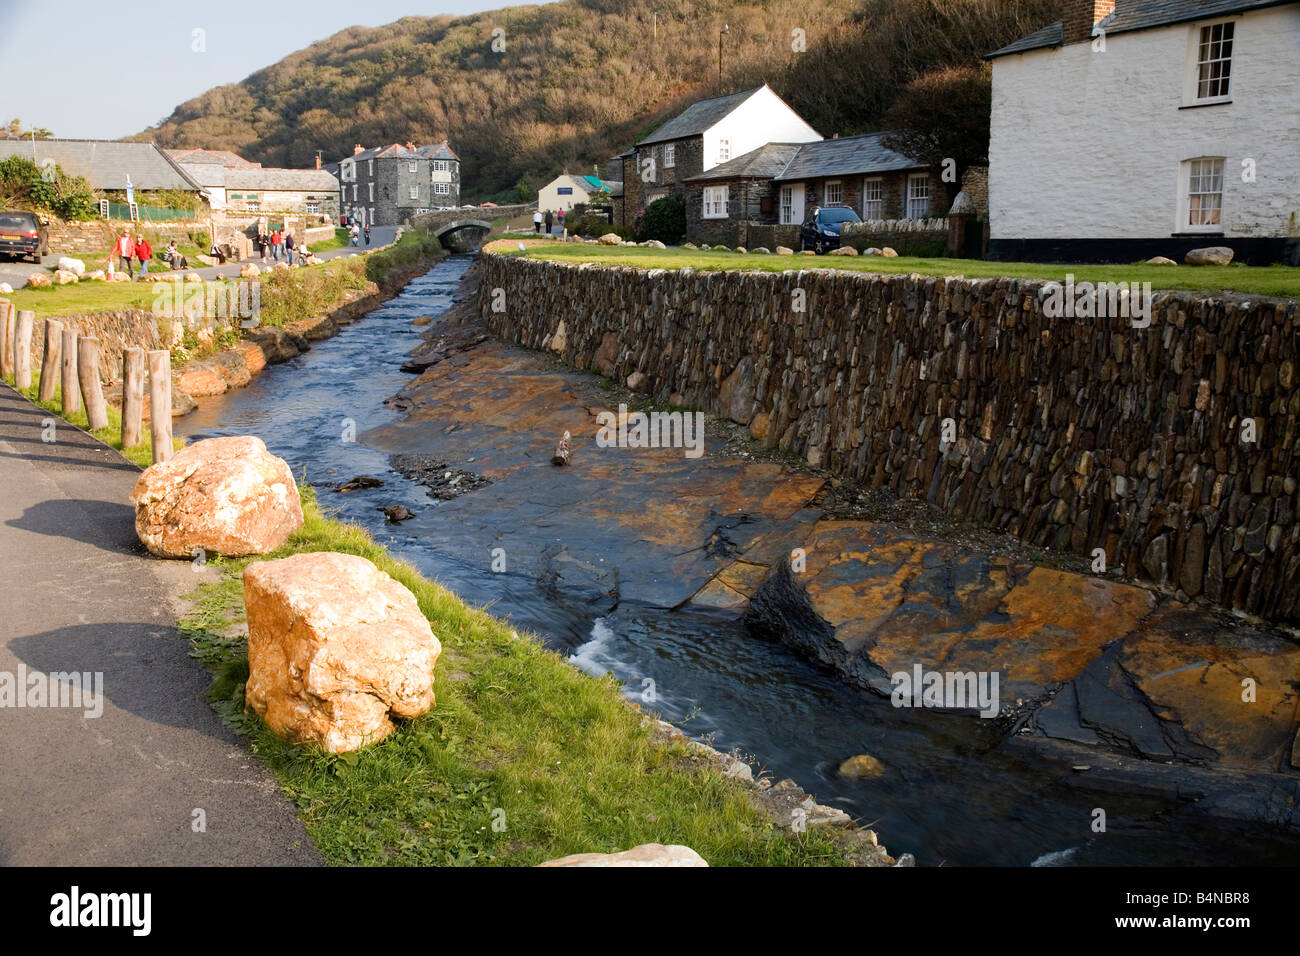 Boscastle Cornwall after the disastrous flooding in 2004 here the restoration work is evident. Stock Photo